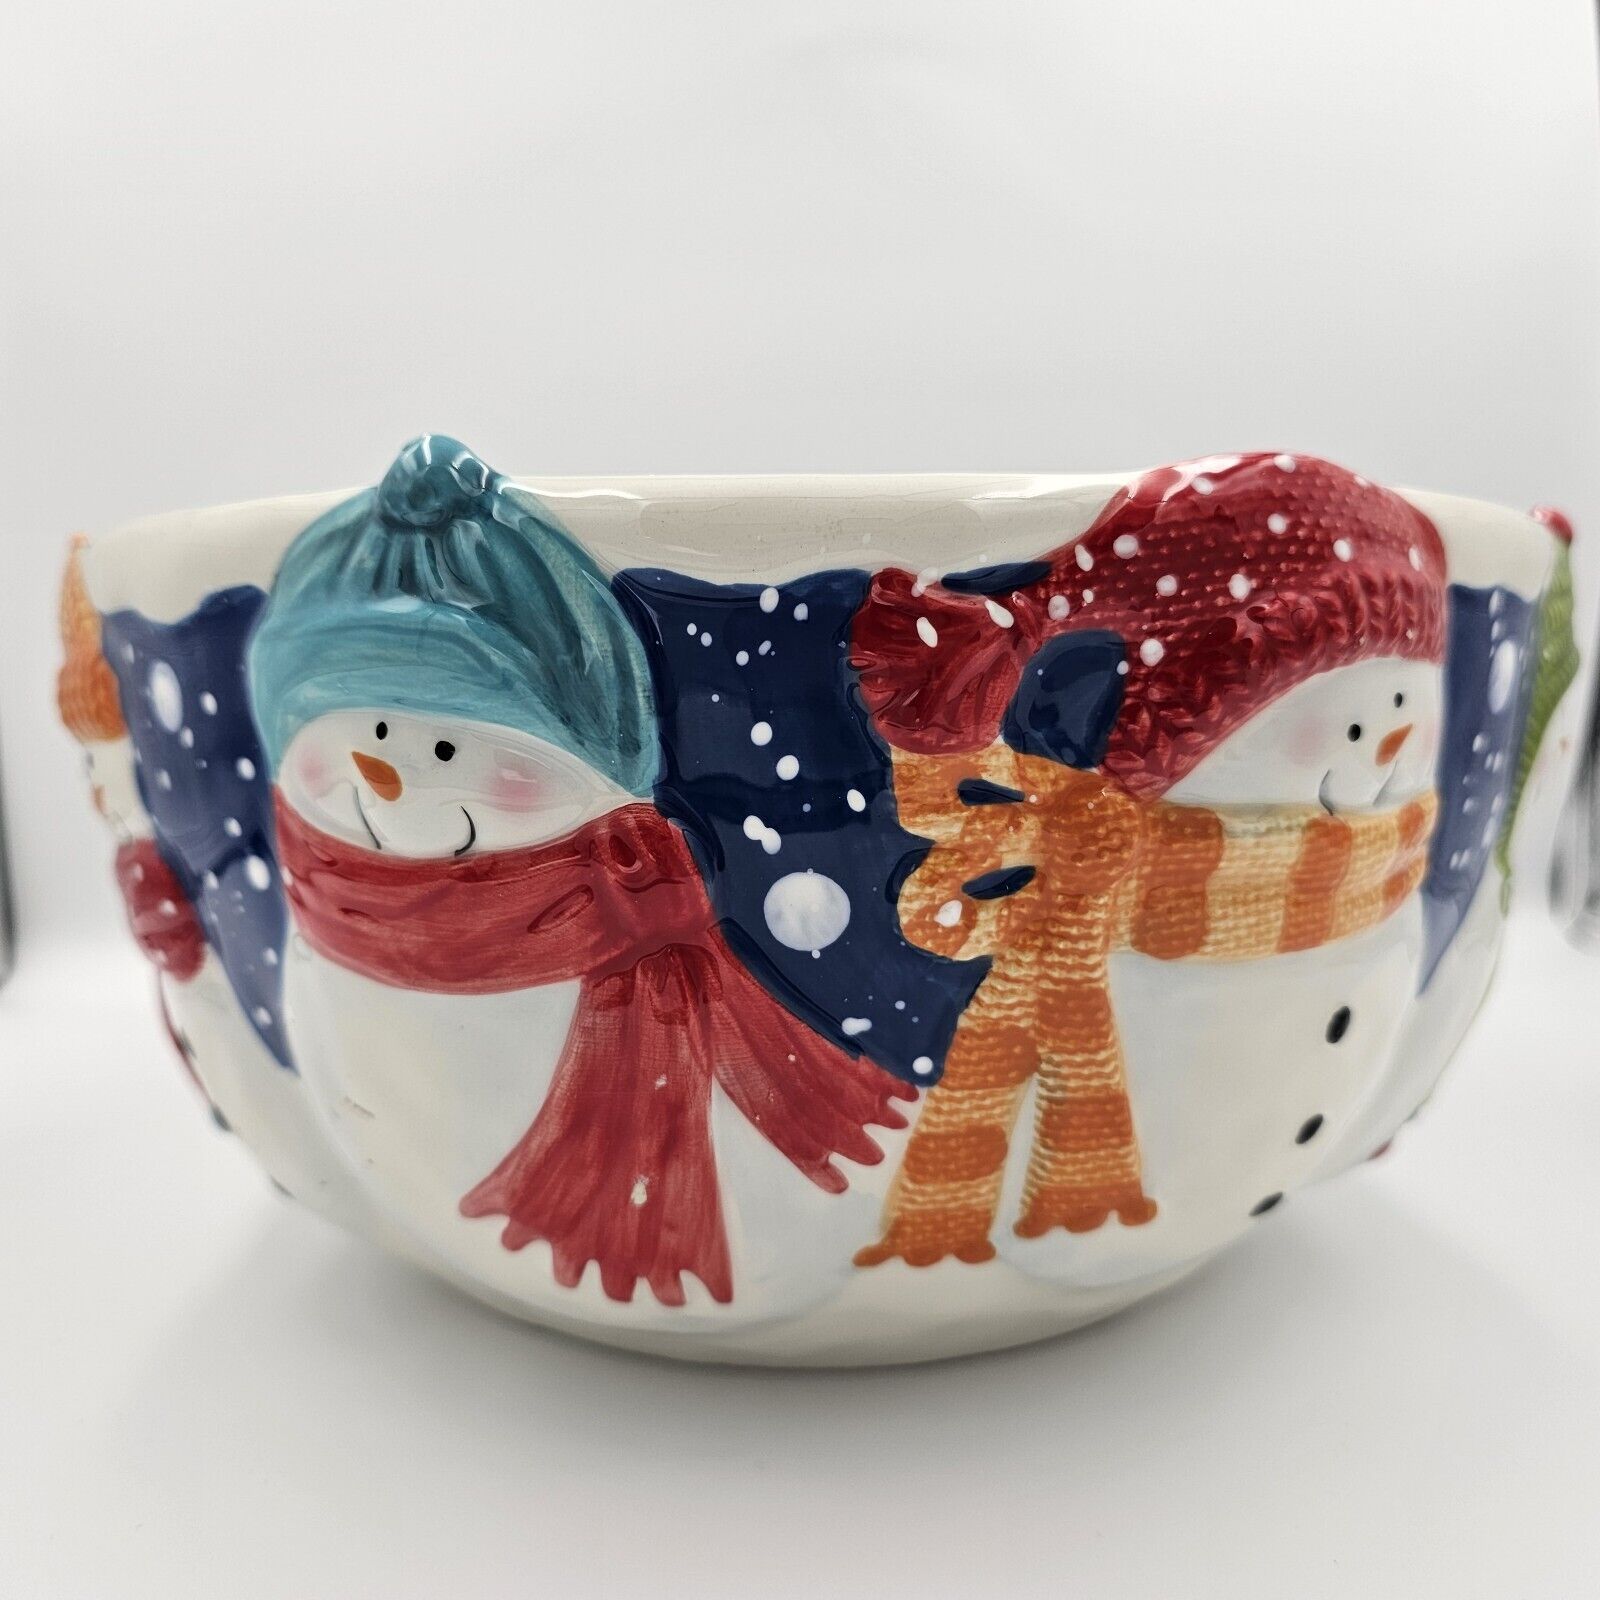 Holiday, Winter, 10 inch Decorative Serving Bowl, Happy Snowman Pattern